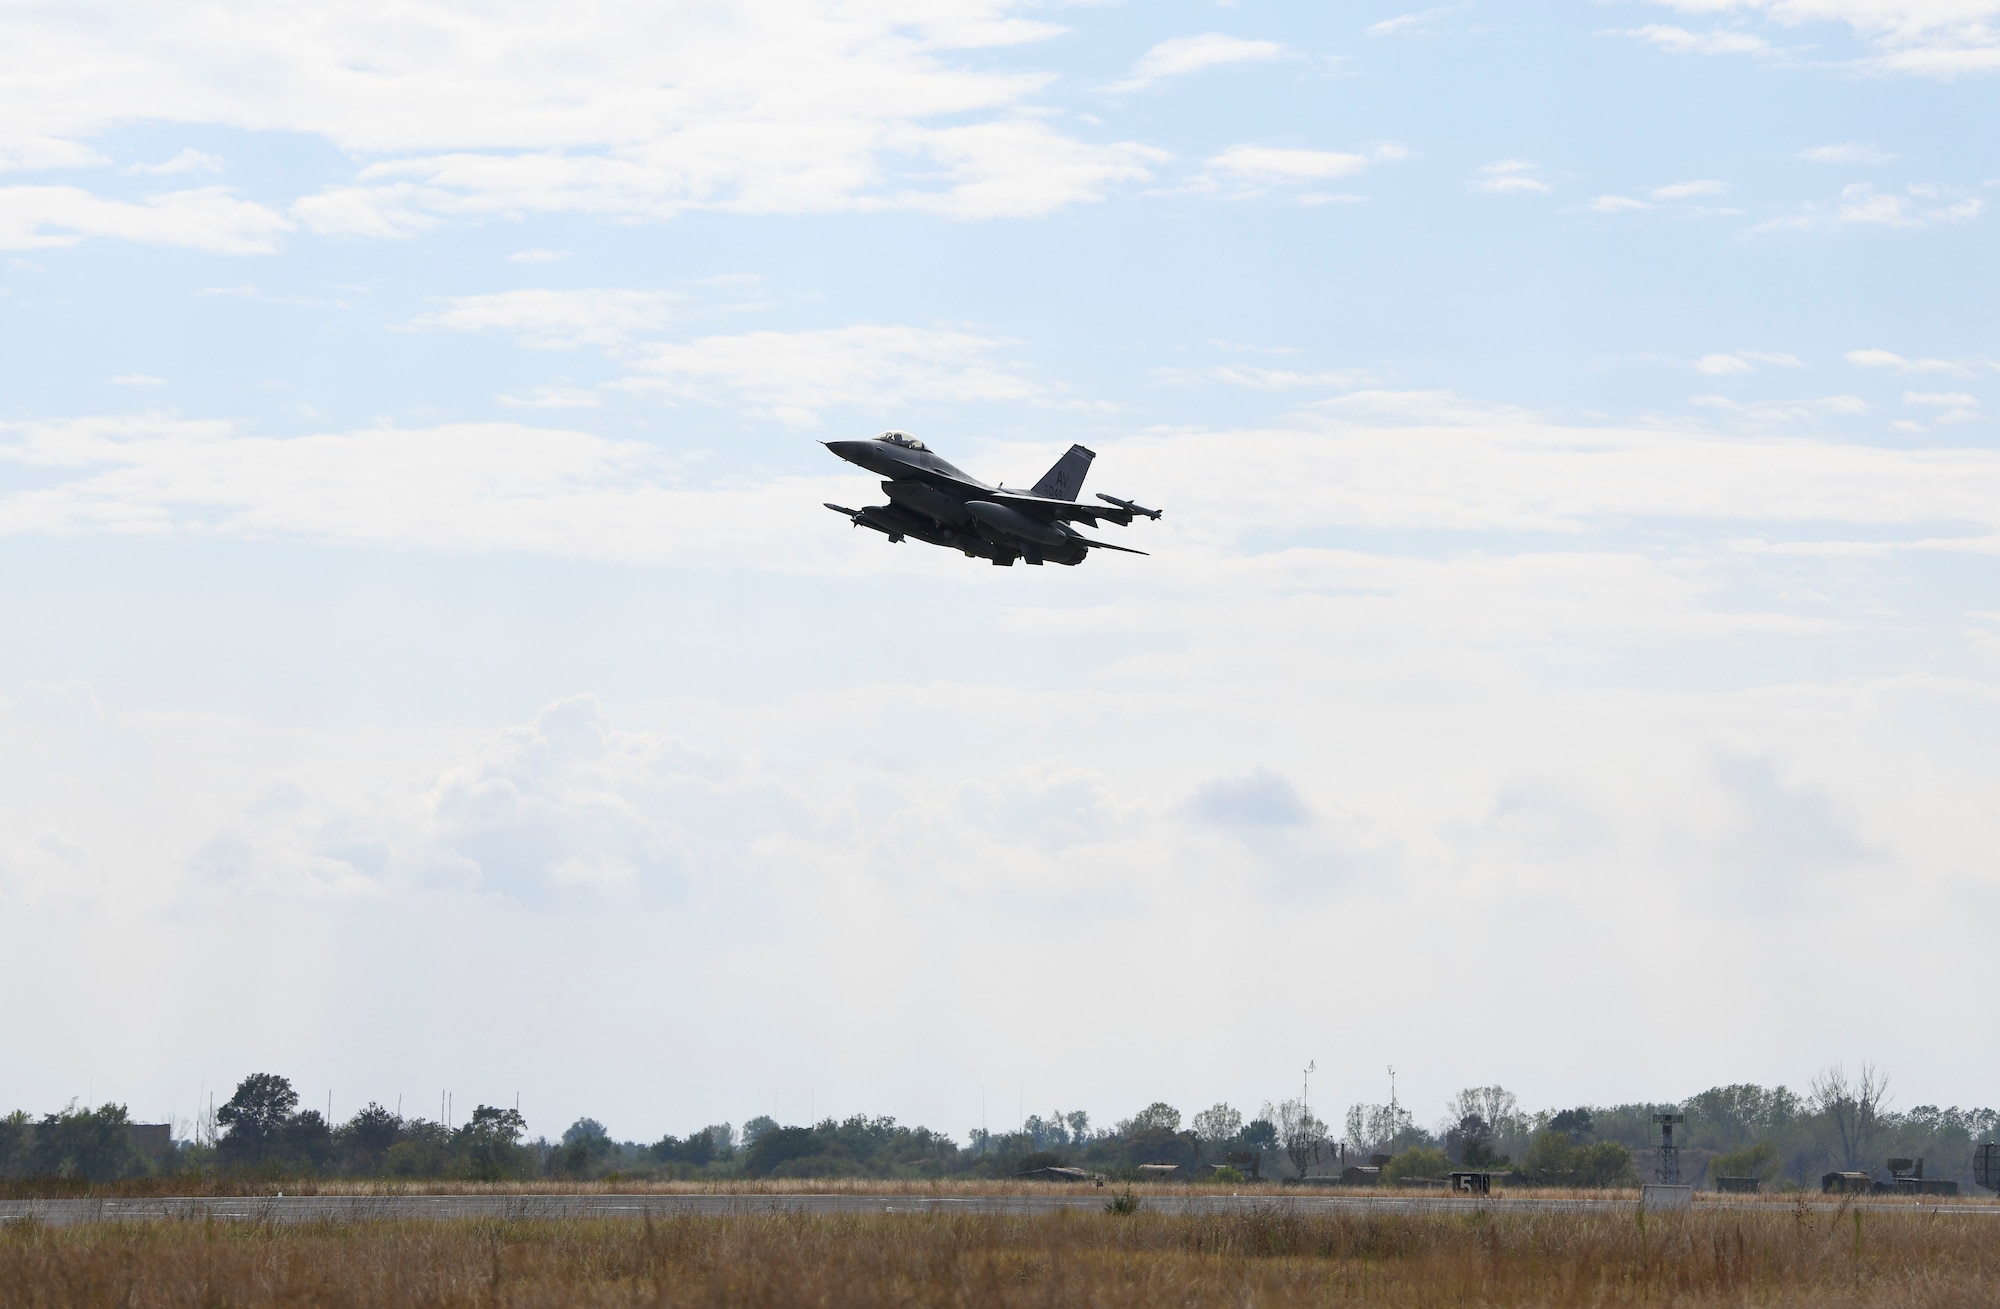 U.S. Air Force Airmen and F-16 Fighting Falcons assigned to the 31st Fighter Wing executed a rapid deployment to conduct “hot pit” refueling and participate in the bilateral training exercise with the Bulgarian Air Force.